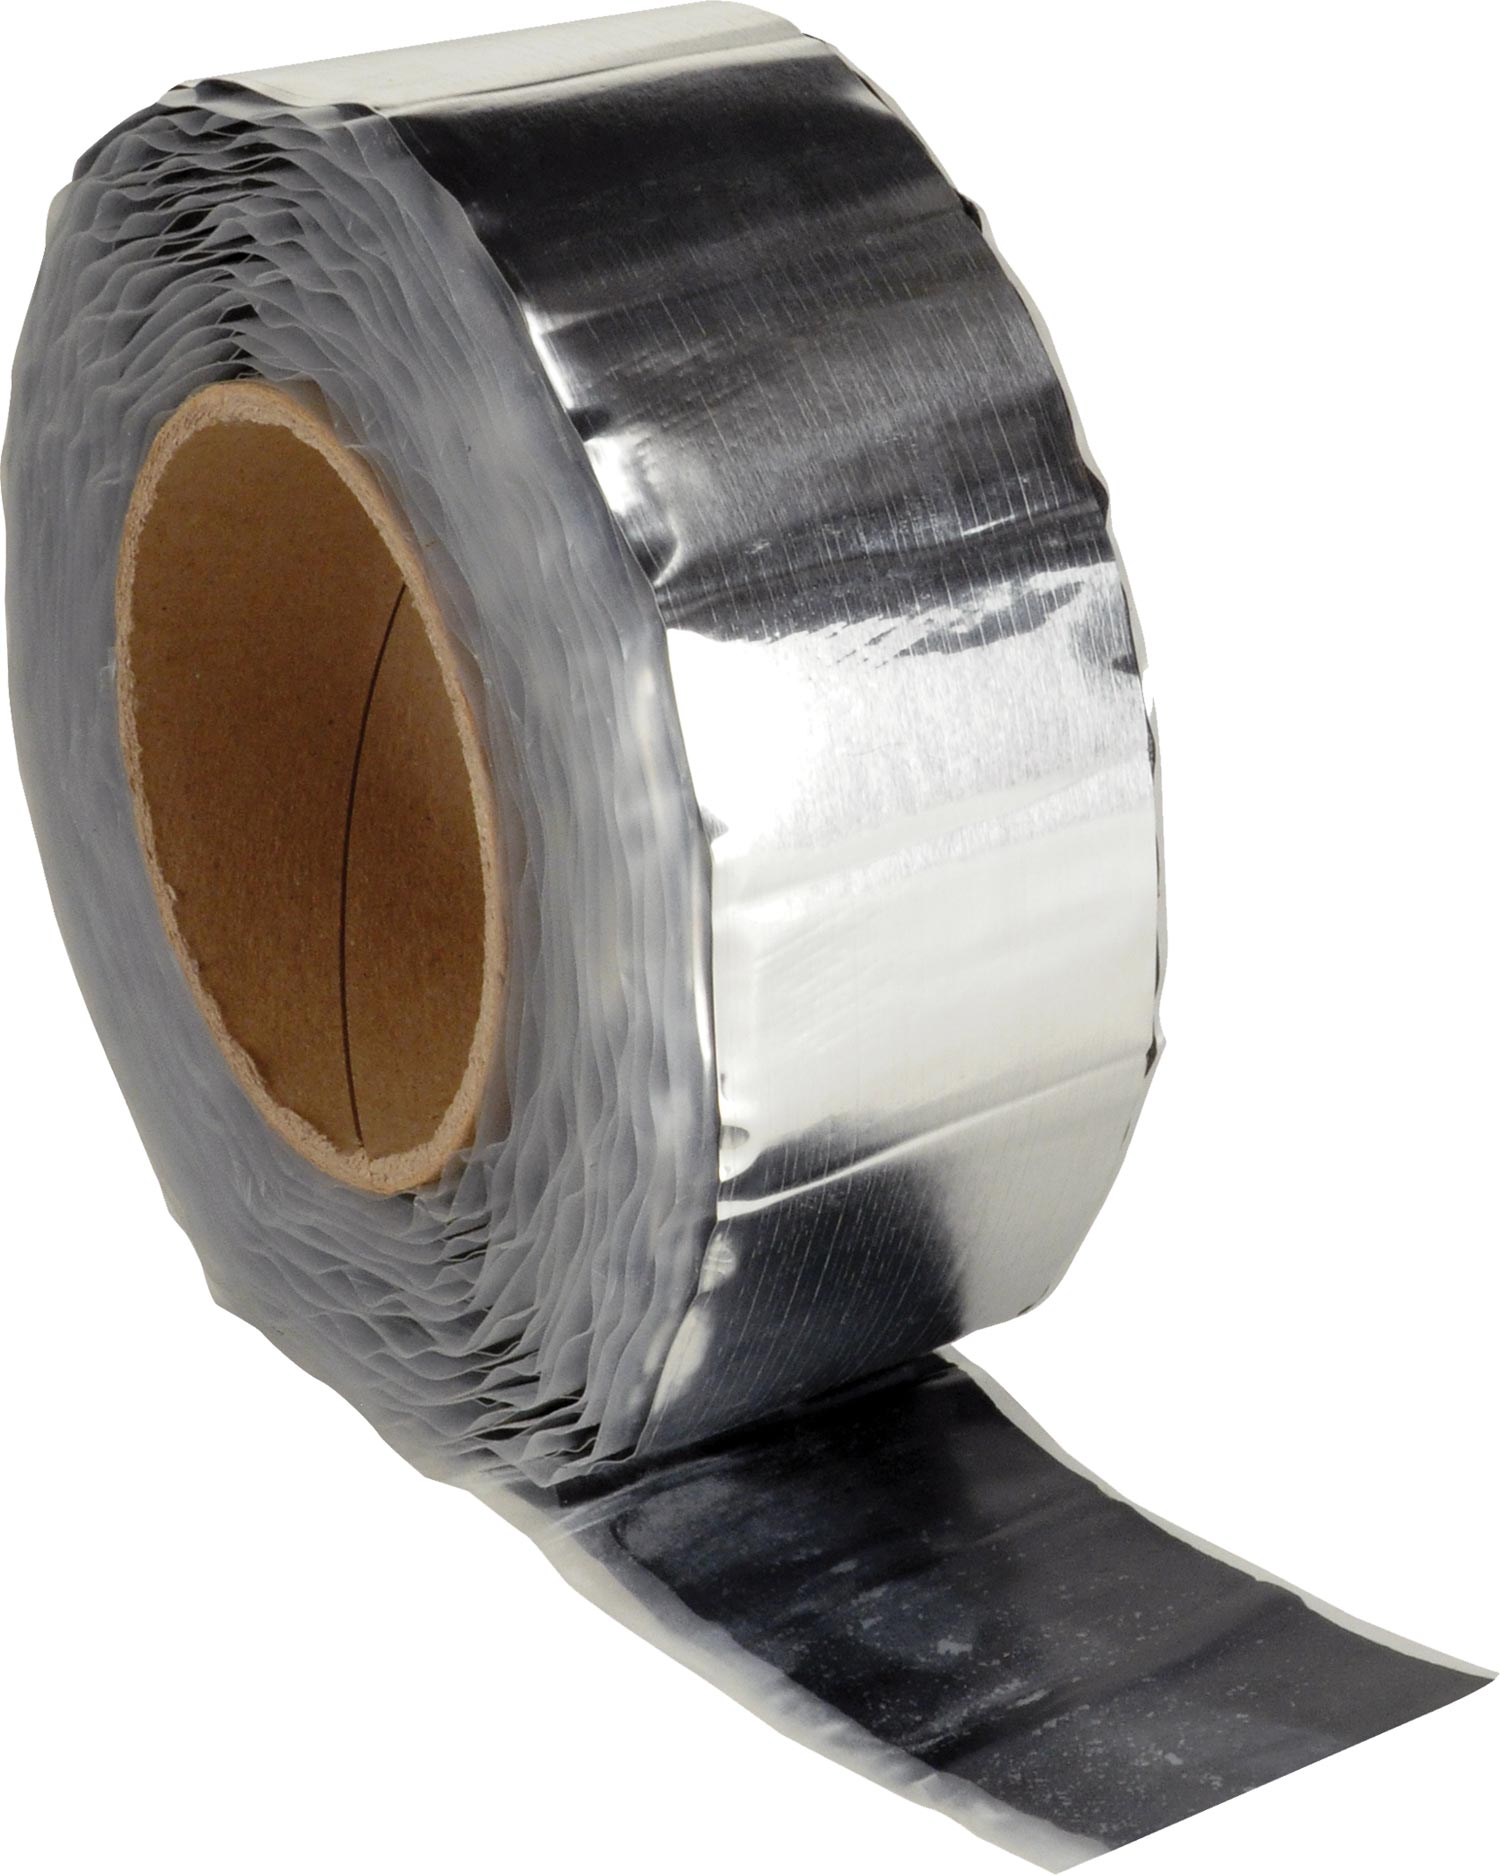 Boom Mat Tape from Design Engineering, Inc